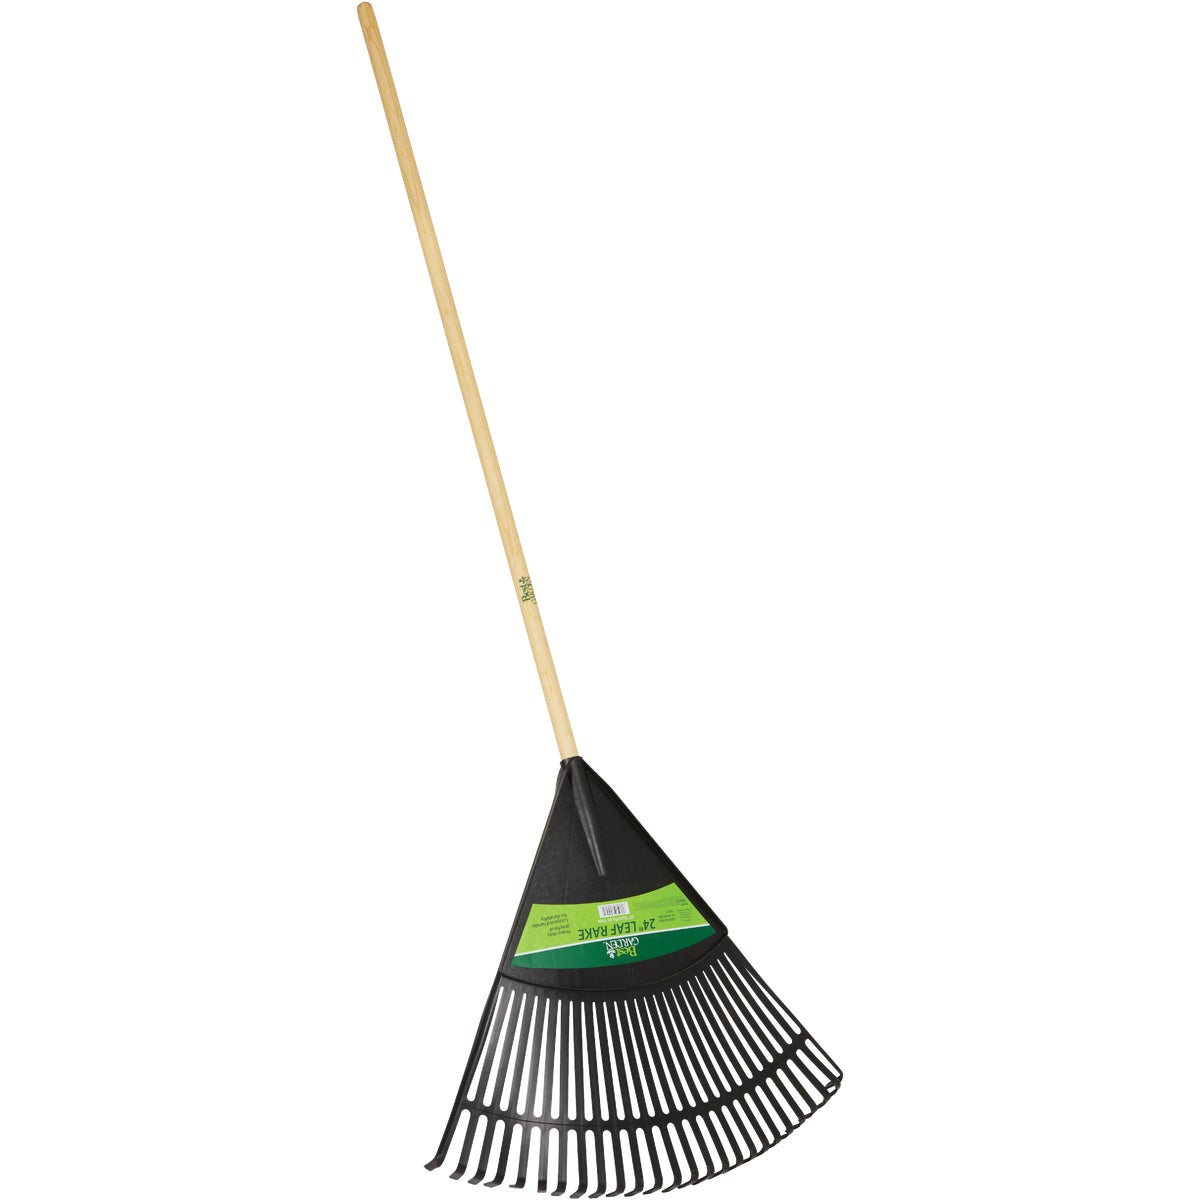 Item 756211, Poly leaf rake with curved polypropylene head. 48 In.